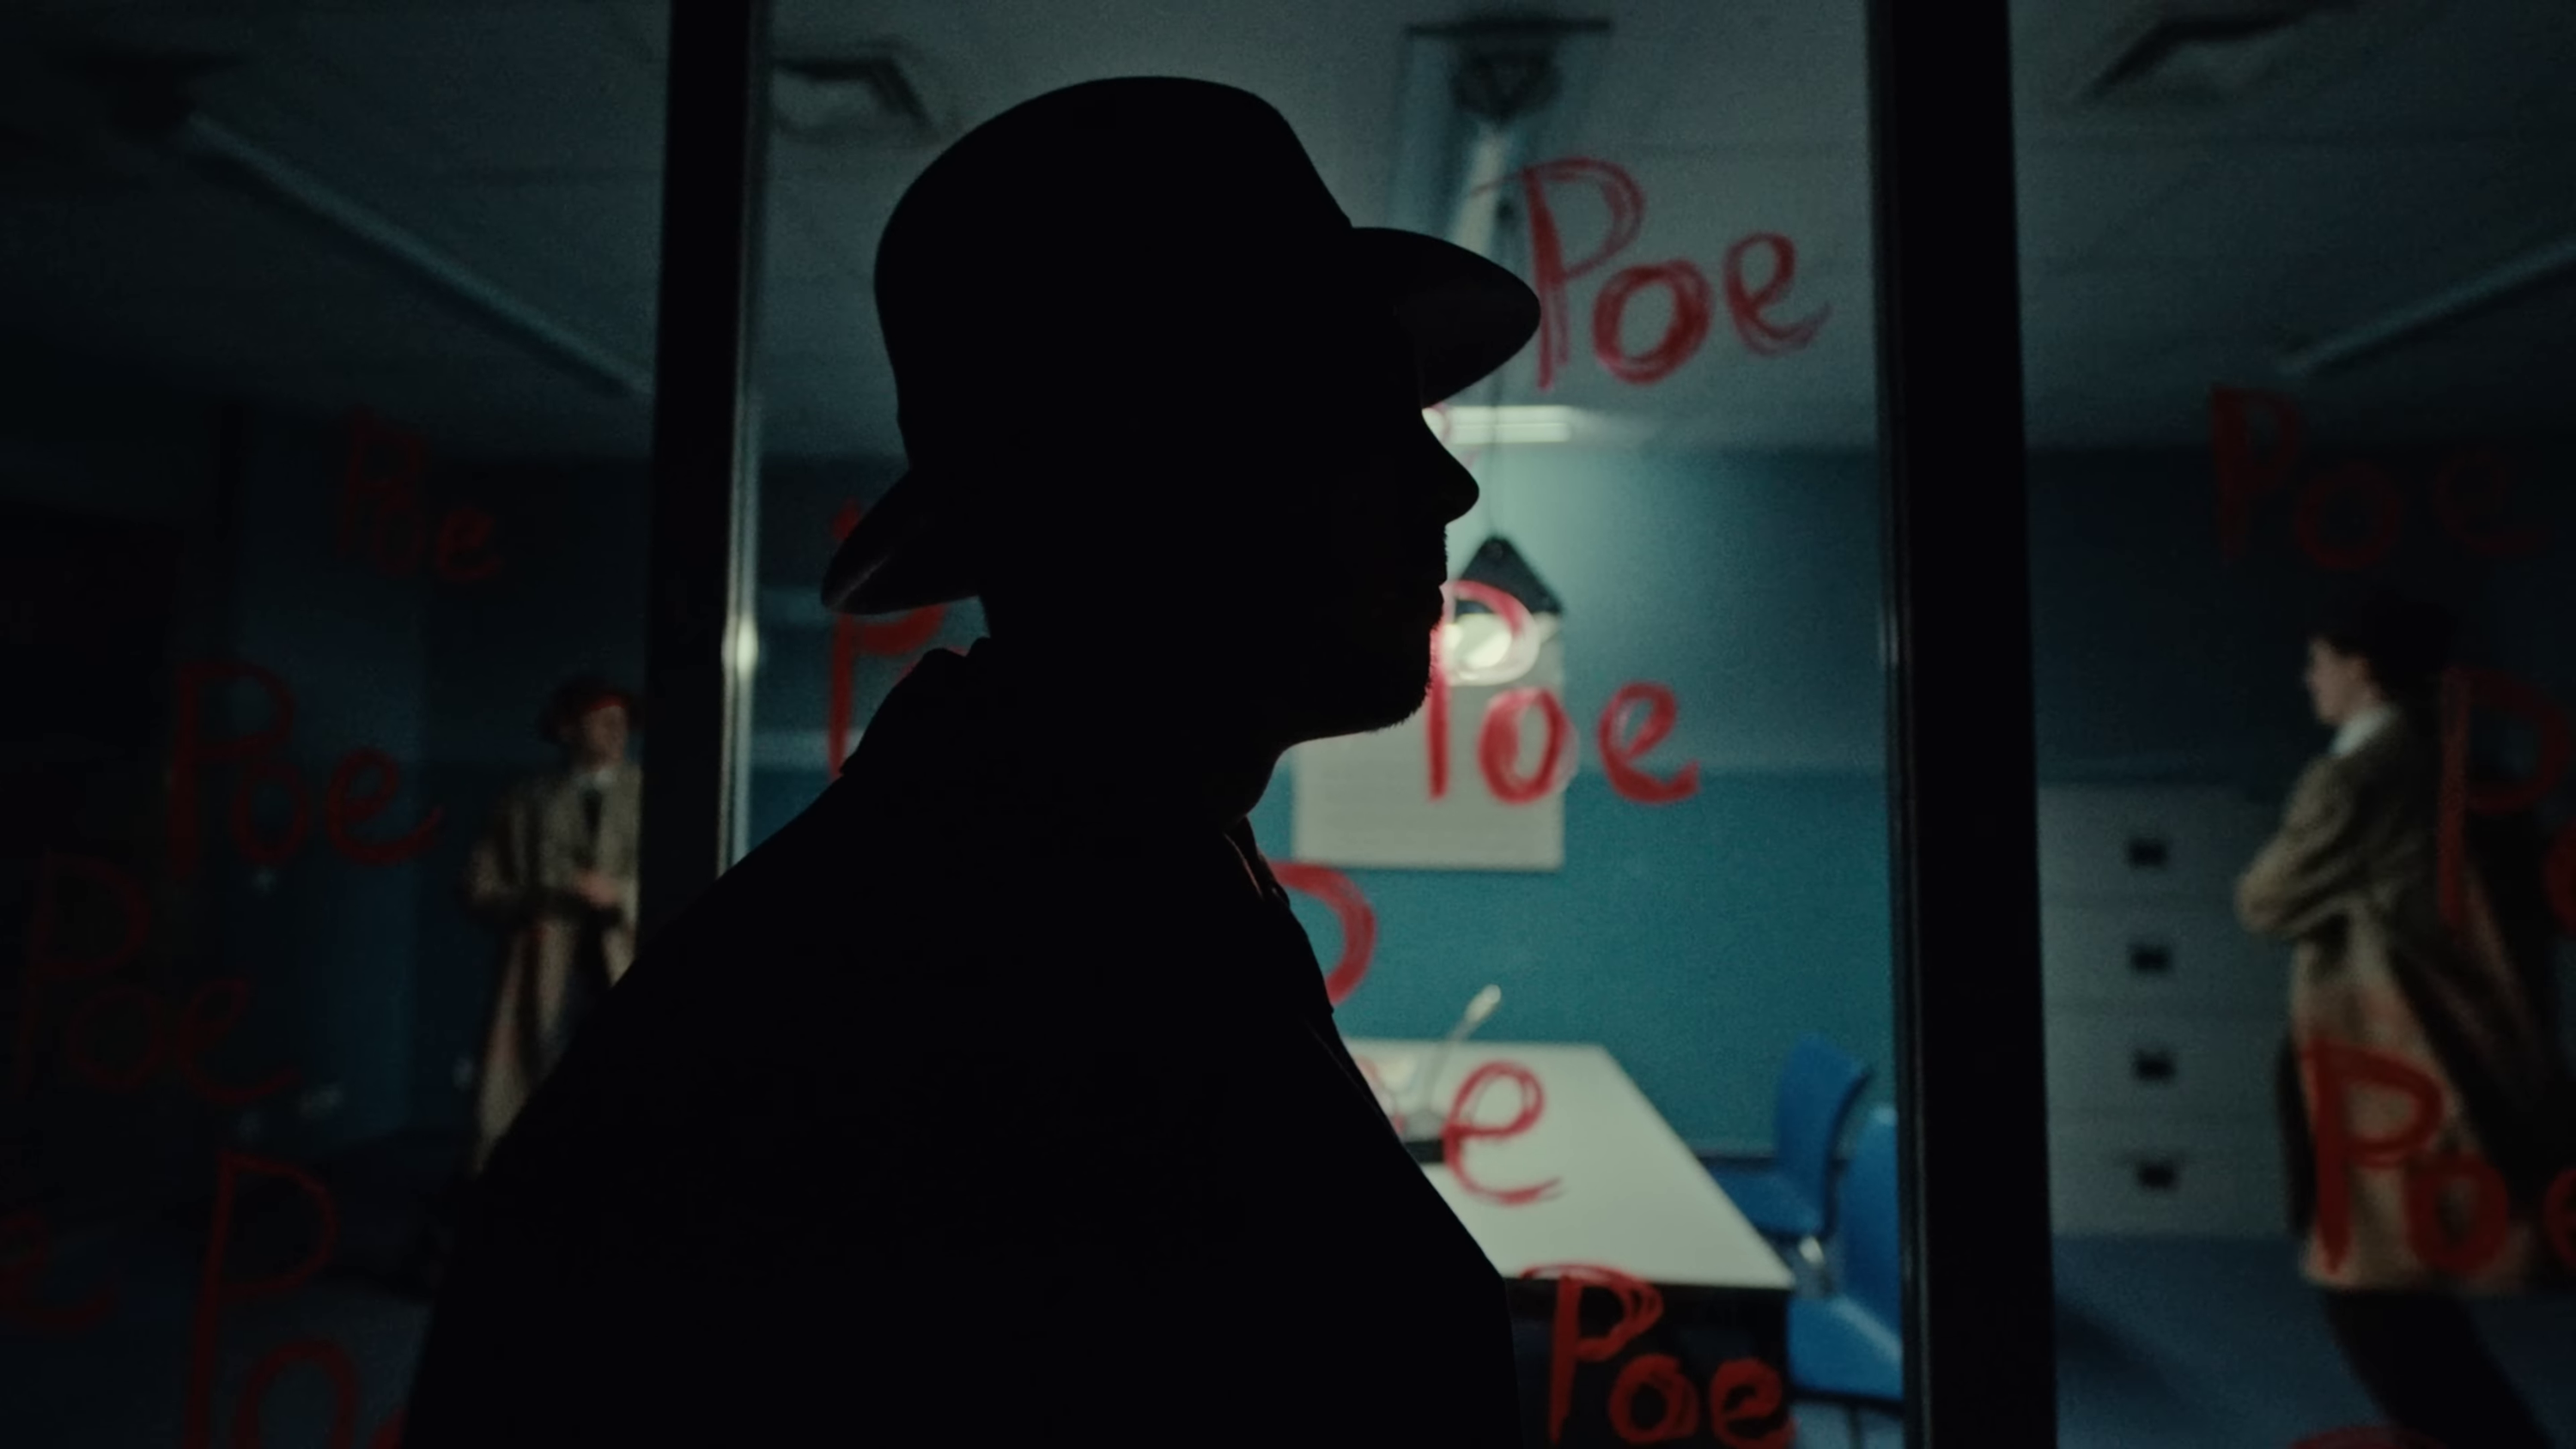 image of a silhouette of a man in front of a window, on which is written the word “Poe” in red lipstick